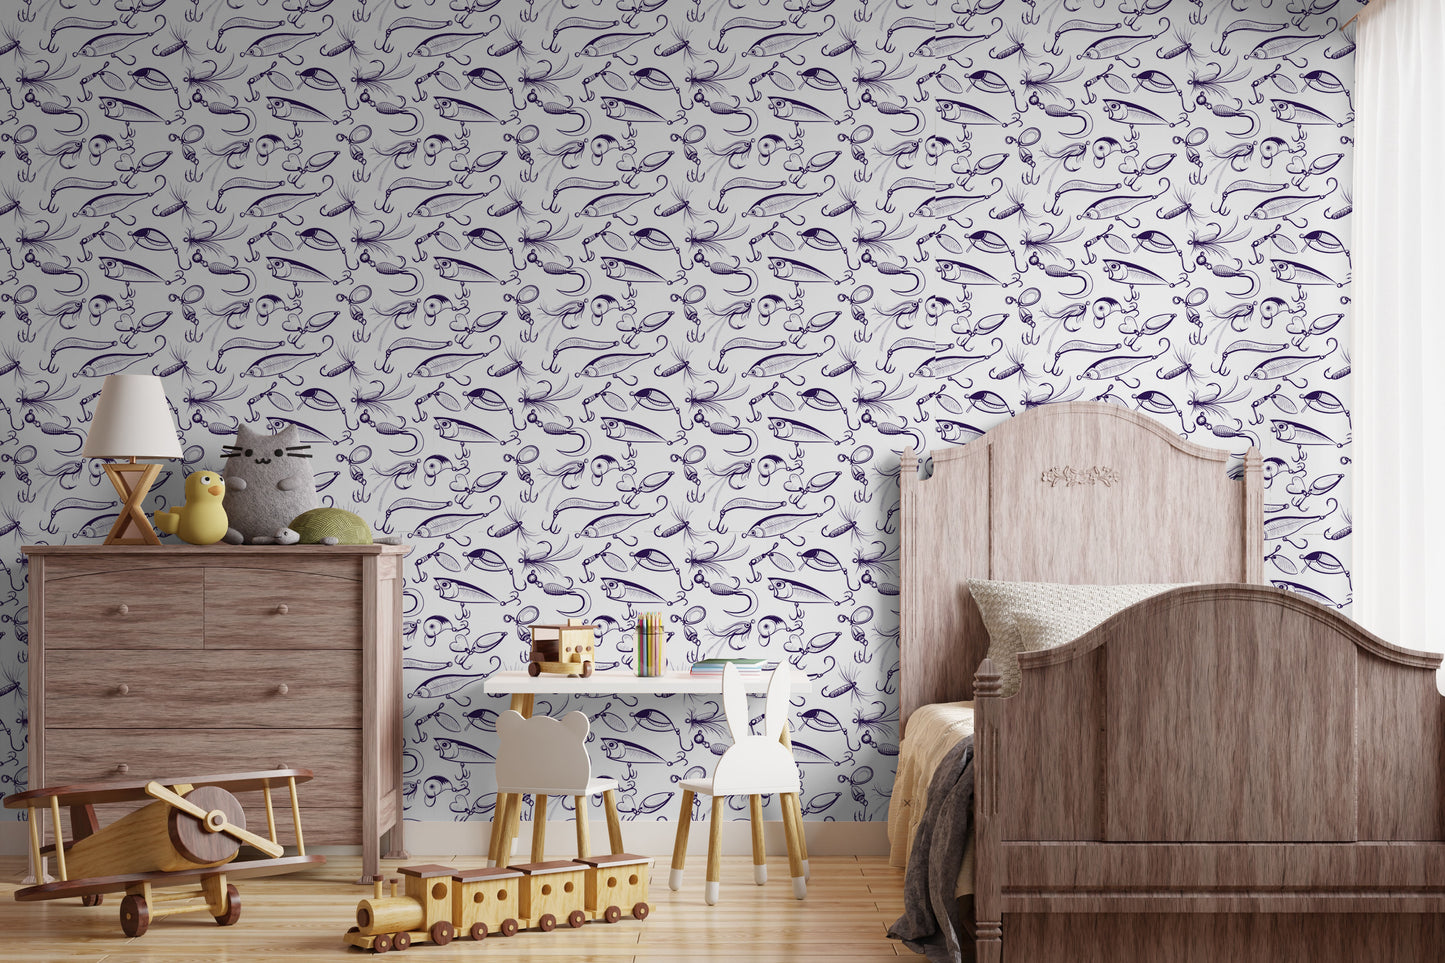 Fishing lure removable peel and stick wallpaper Nautical wallpaper